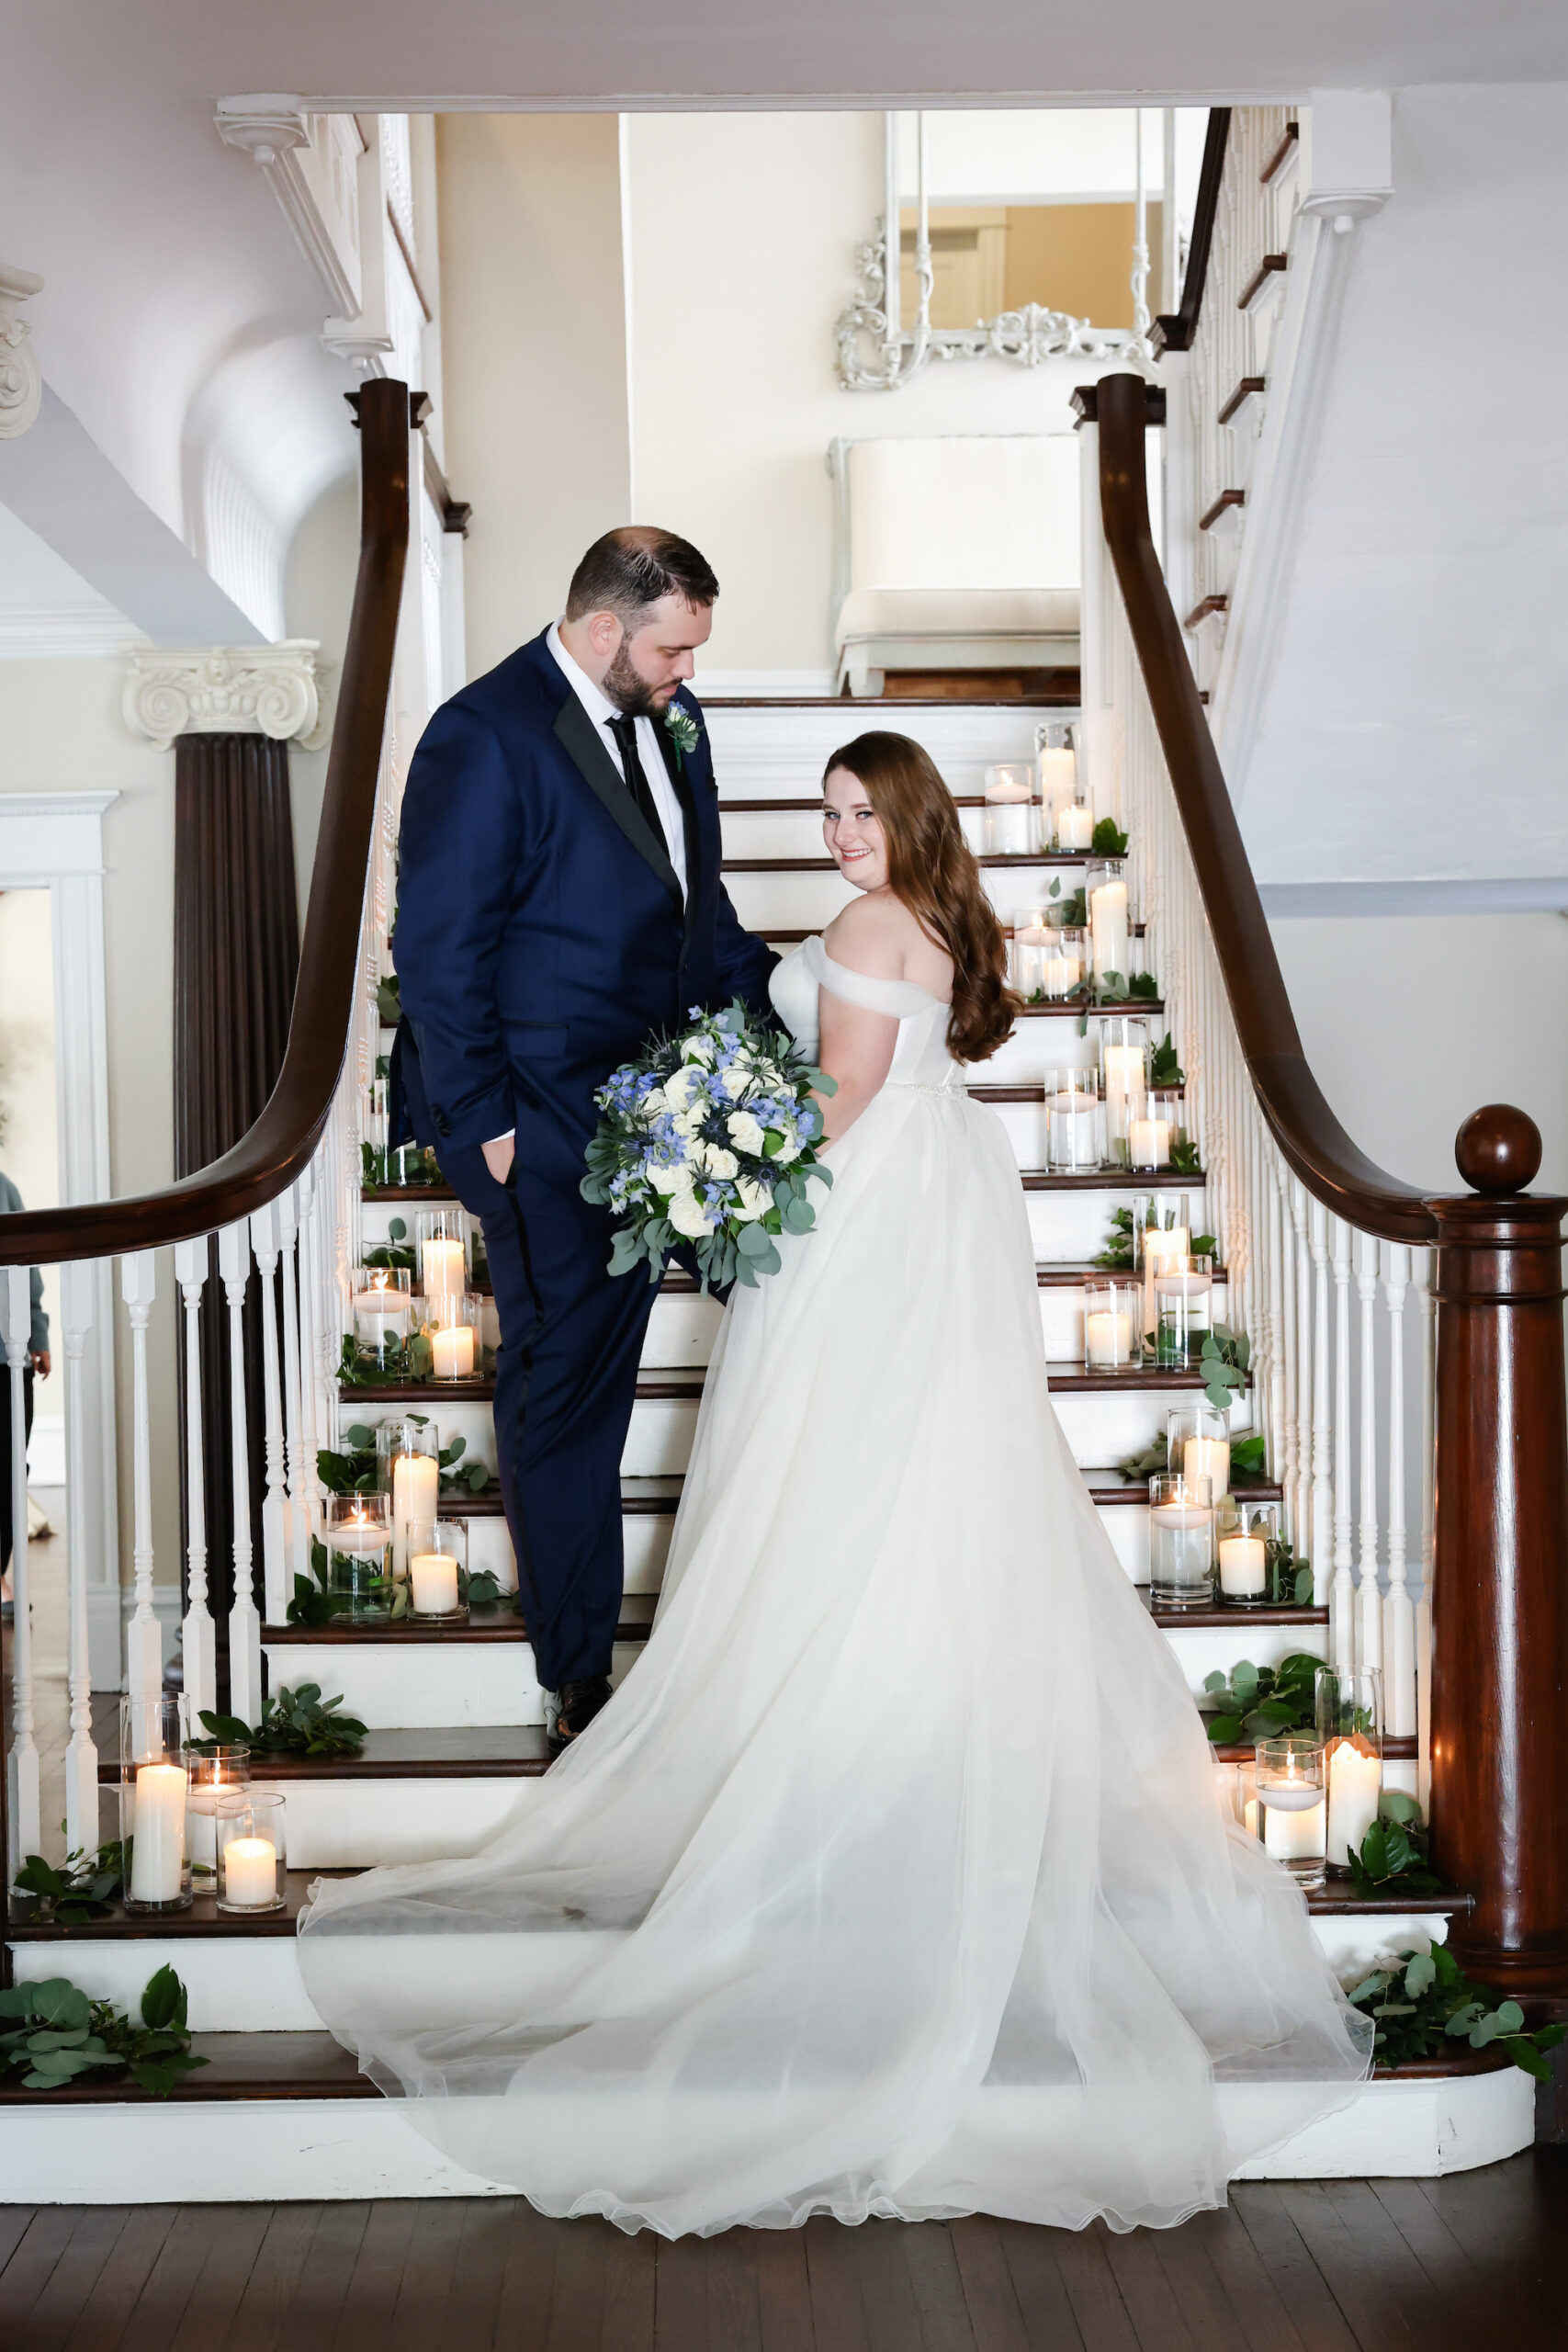 Romantic Bride and Groom Candlelit Stairs Wedding Portrait | South Tampa Wedding Photographer Lifelong Photography Studio | Dress Truly Forever Bridal